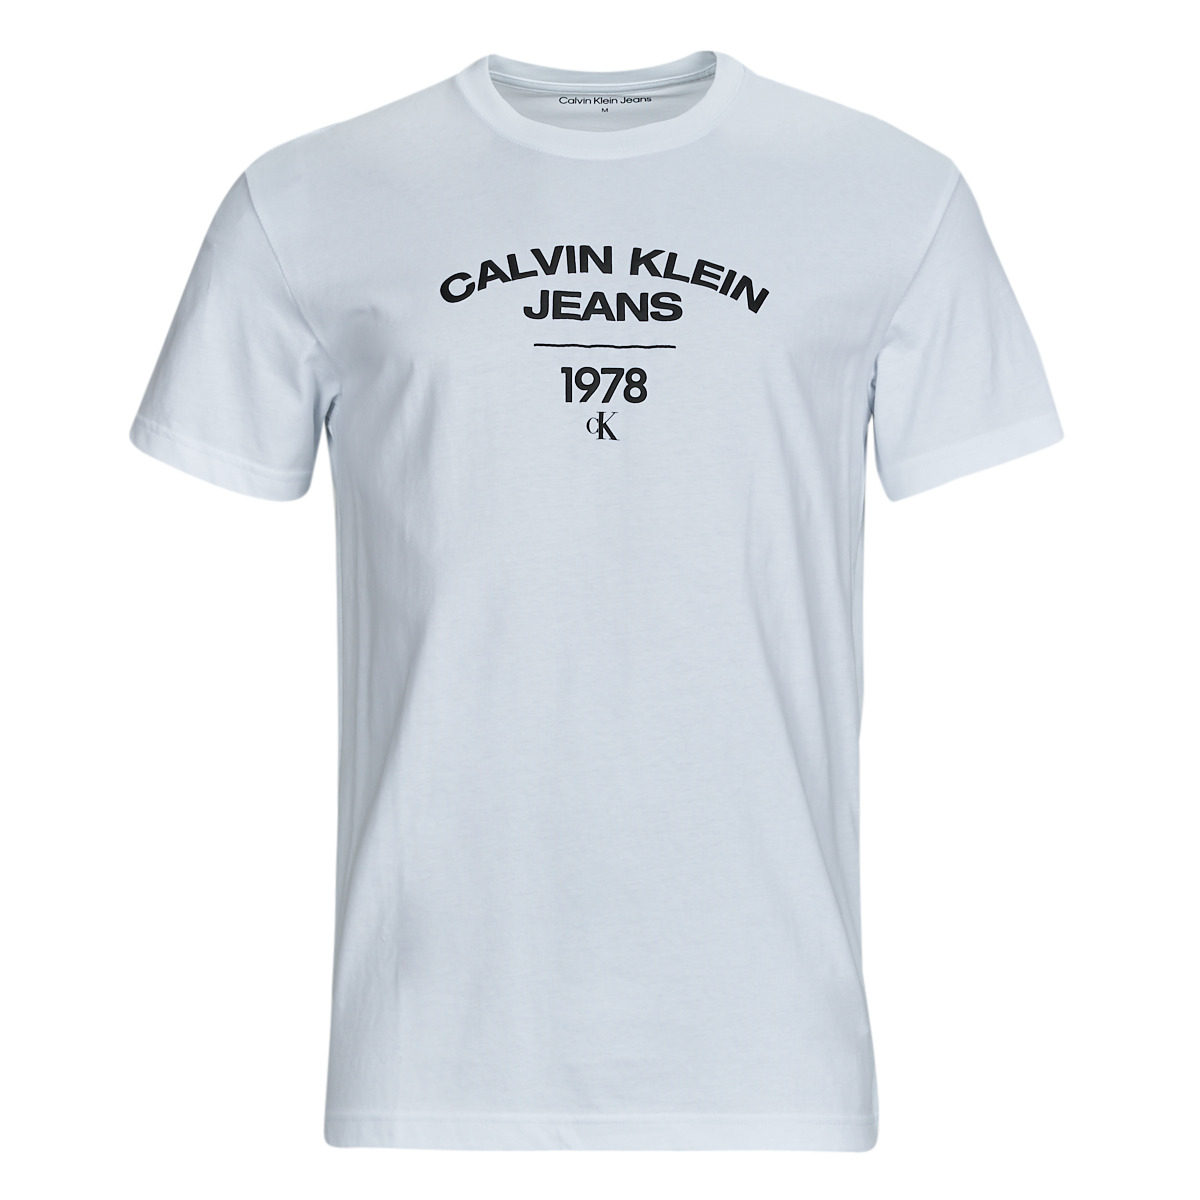 LOGO Spartoo | CURVE delivery Free - Clothing Calvin Klein VARSITY Jeans ! Men T-SHIRT NET White short-sleeved t-shirts -